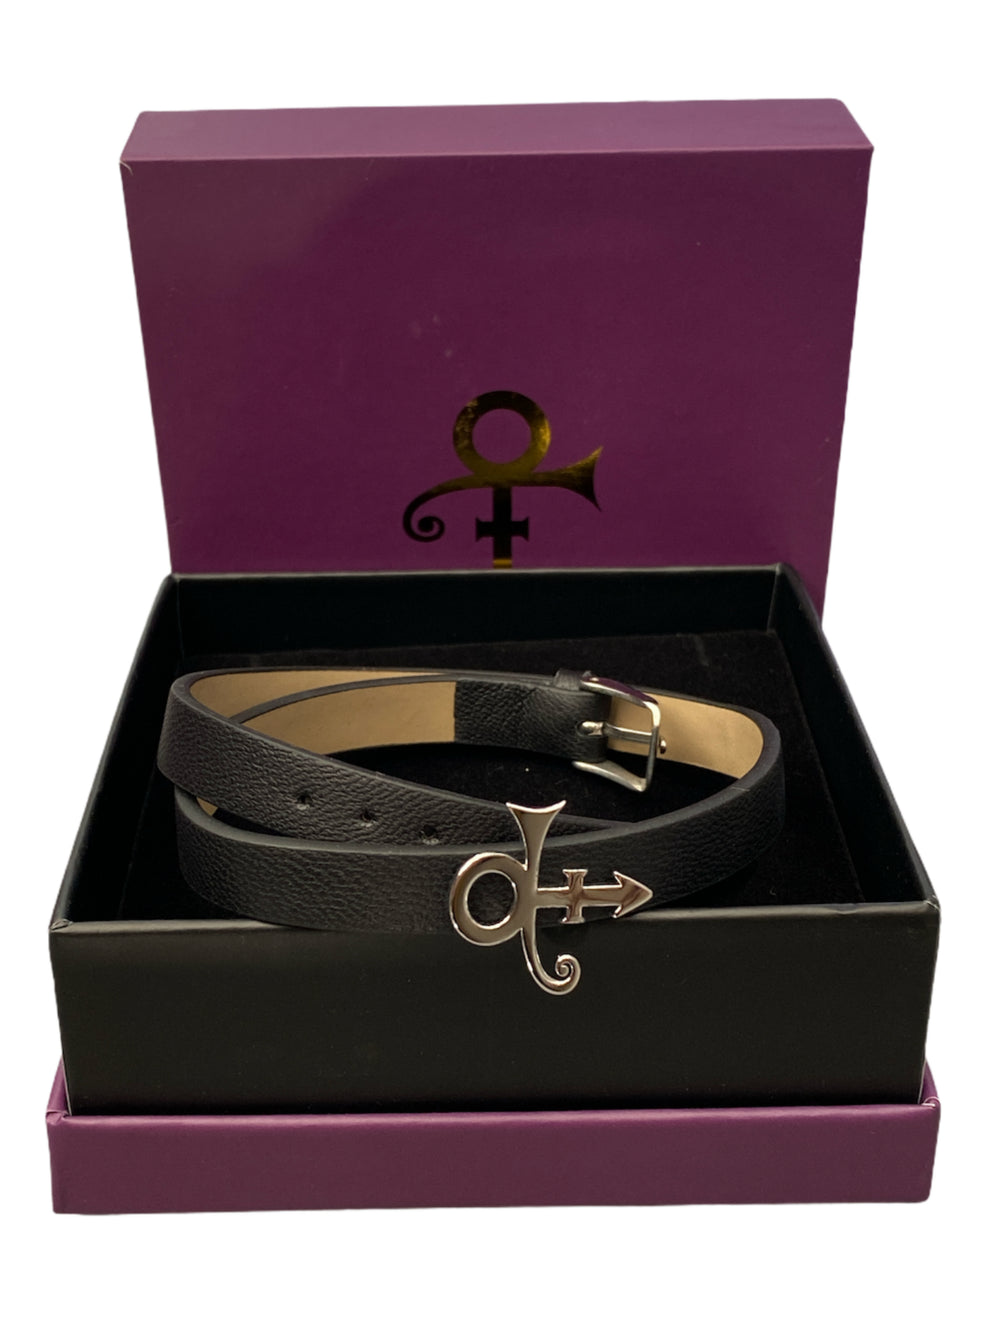 Prince – Official Estate Leather Bracelet Love Symbol Silver Plated Boxed